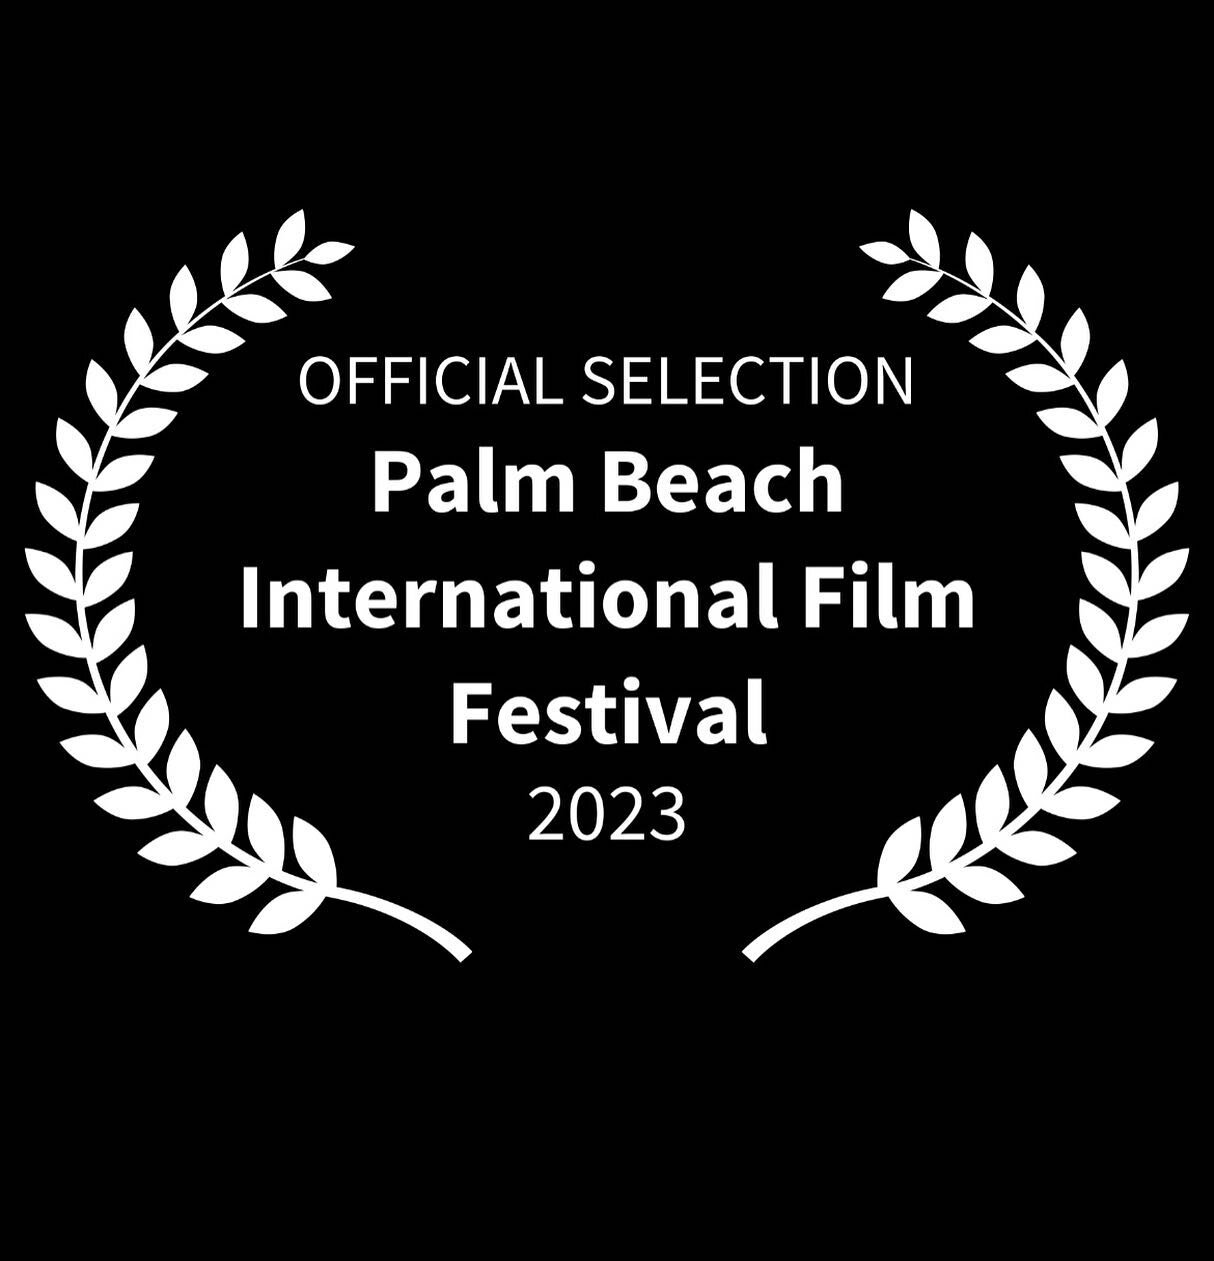 Excited to screen our film at the Palm Beach International Film Festival in April! 🎉

@production_house_chicago